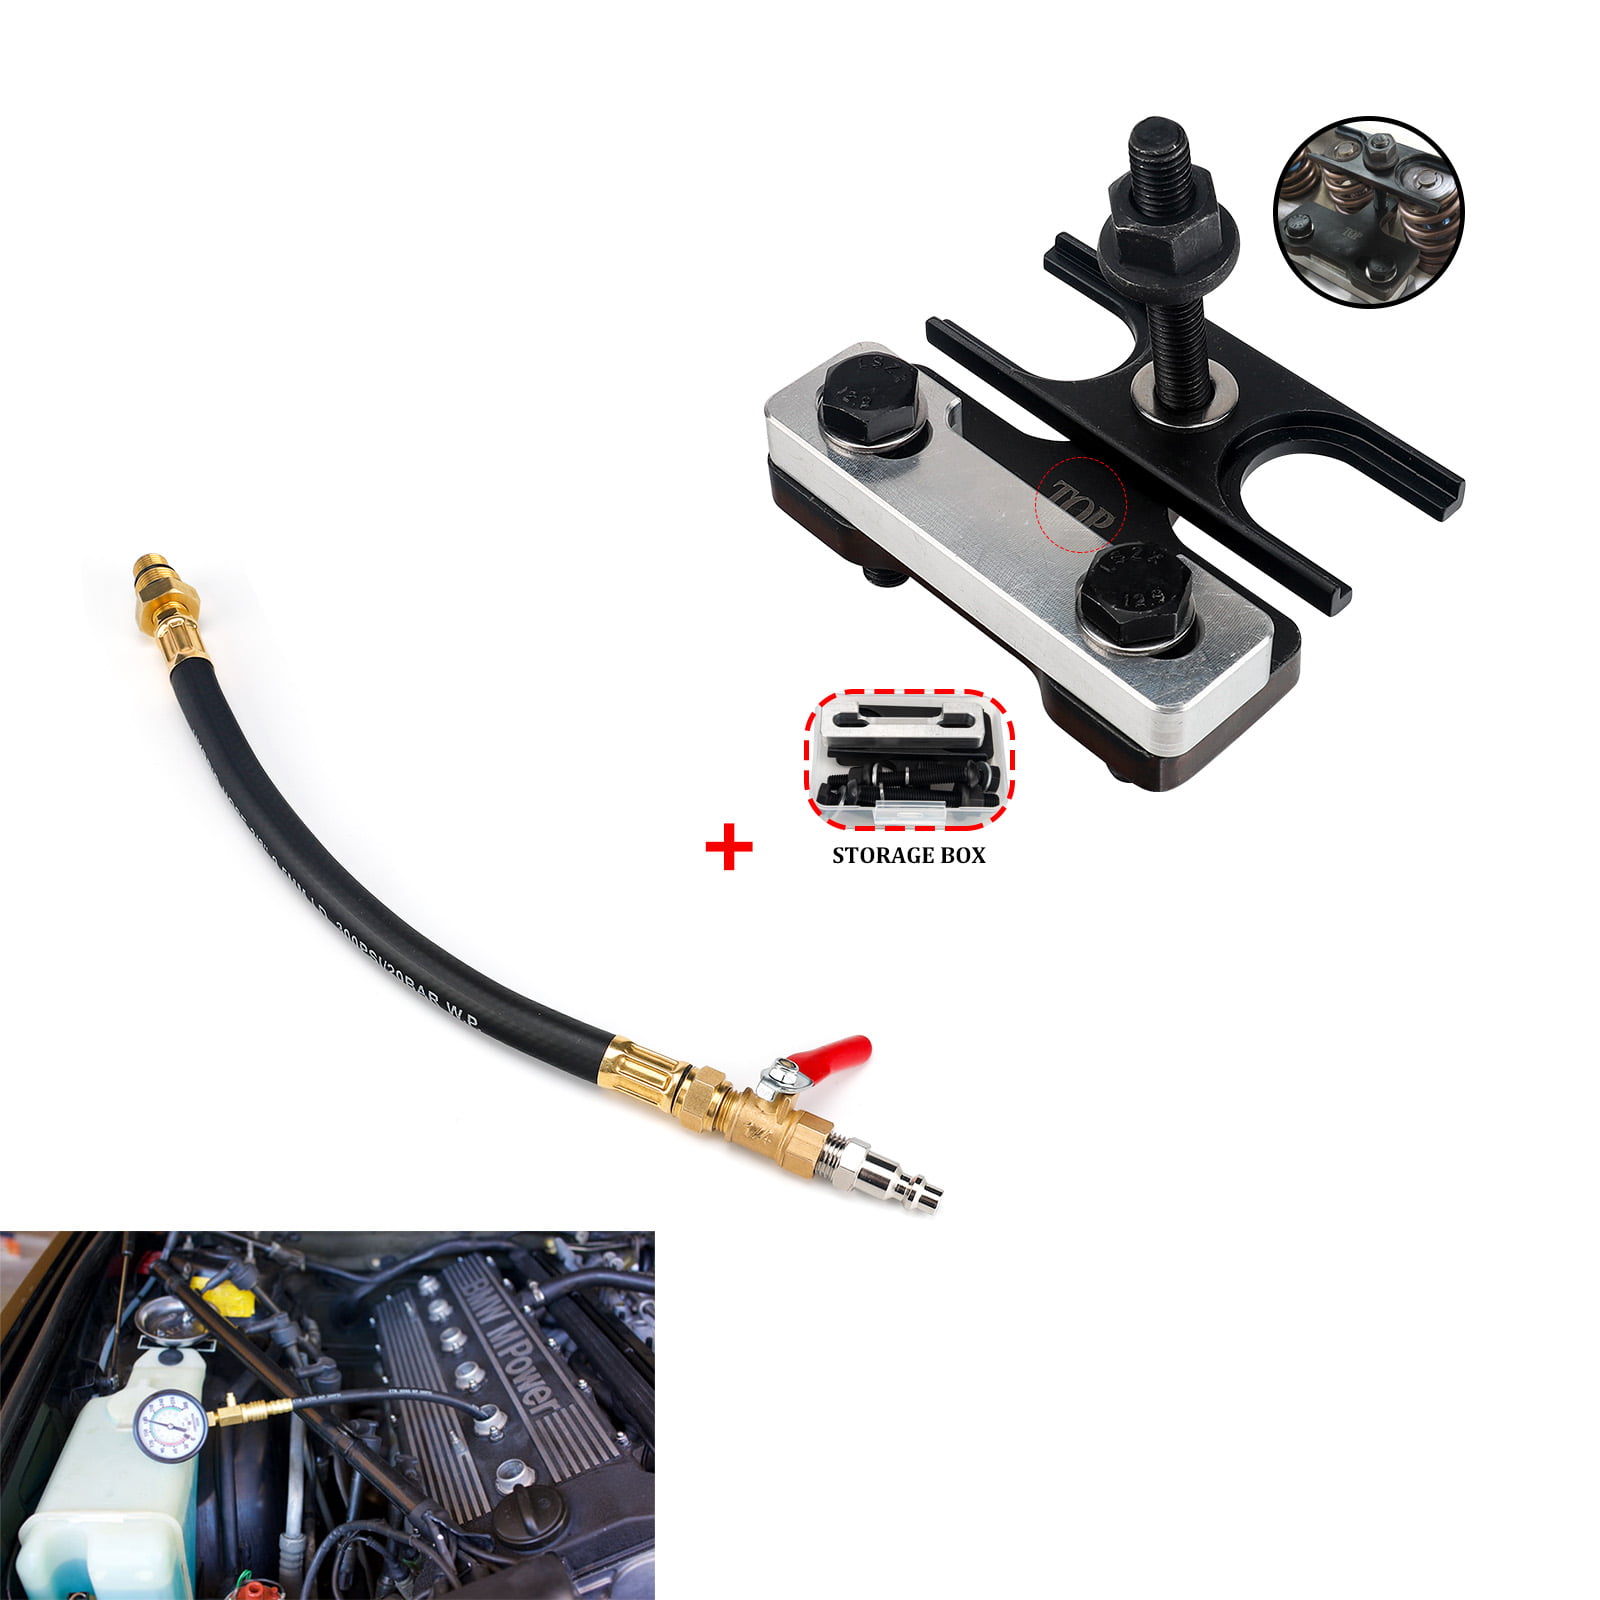 3mirrors Engine Air Valve Holder Pressure Pipe M14+M18 Thread to 1/4 NPT with Ball Valve Cylinder Leakage Testing Assistant Tool Compatible with Mustang Ford GM Trucks LS1/LS2/LS3/4.8/5.3/6.0 